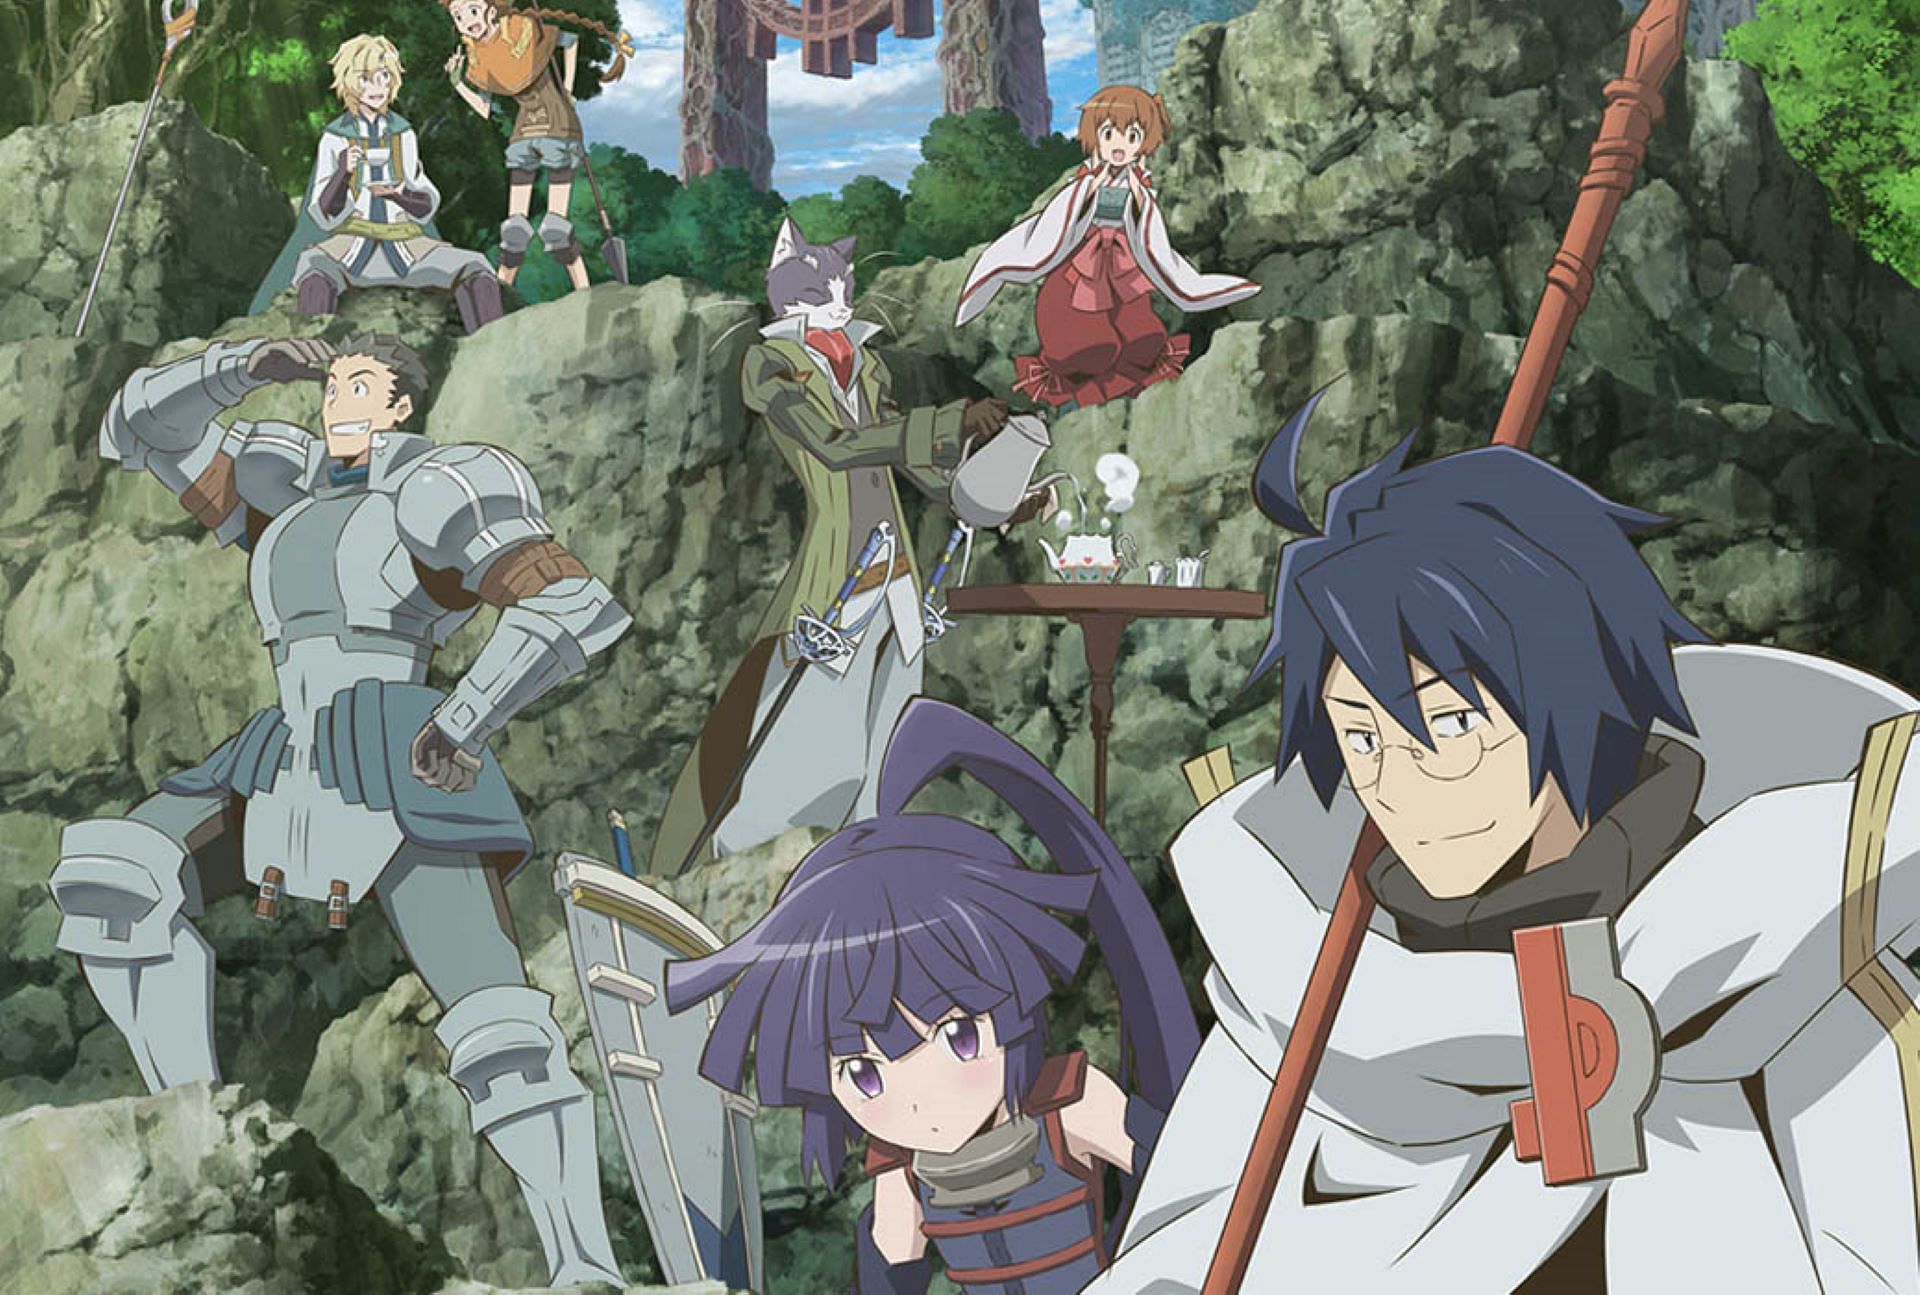 Amazon.com: Anime Log Horizon Manga Poster for Room Aesthetics Decorative  Picture Print Wall Art Canvas Posters Gifts 08x12inch(20x30cm) Framed:  Posters & Prints